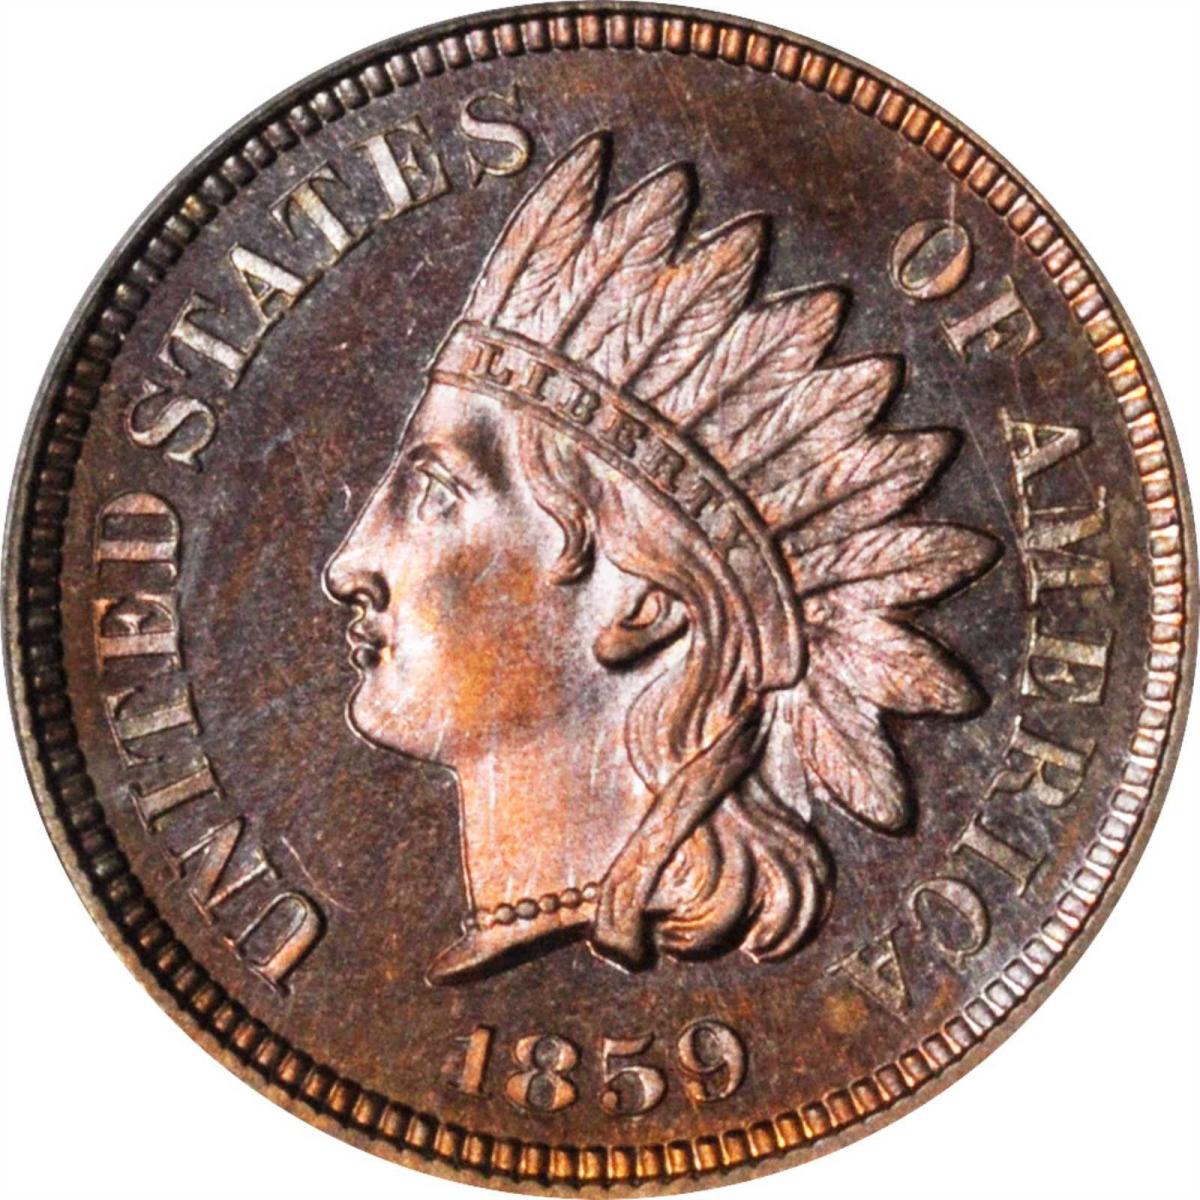  Shown is the 1859 Indian Cent. Snow-PR2. Proof-65 Cameo (PCGS) being offered at the 2019 Baltimore expo. (Image courtesy of Stack's Bowers.)